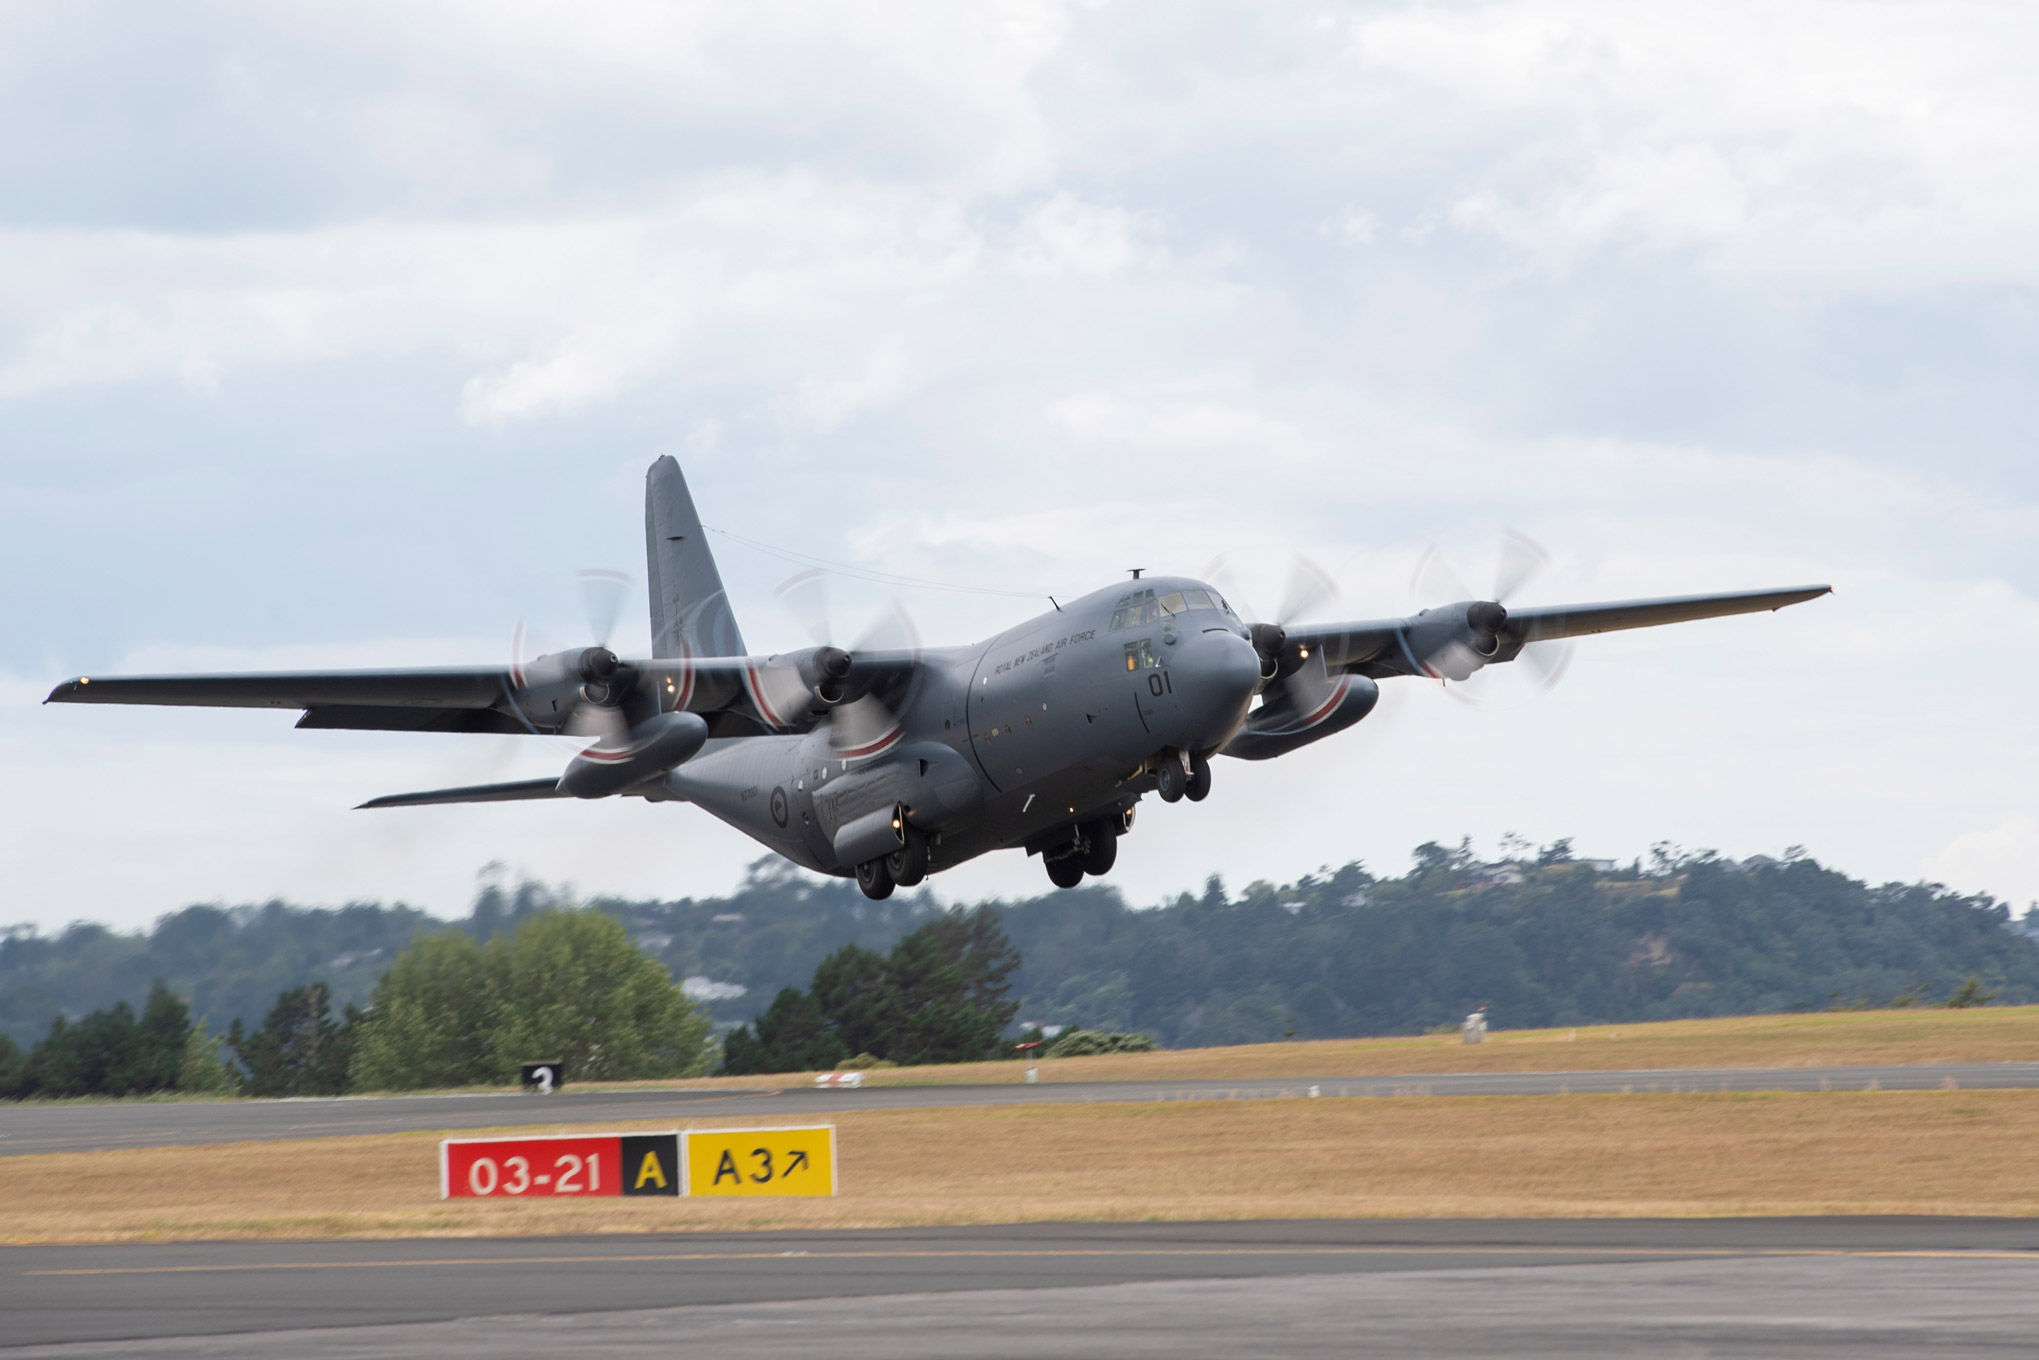 In this file photo from Jan. 20, 2022, , a Royal New Zealand Air Force C-130 Hercules is seen taking off from Auckland, New Zealand, to deliver humanitarian aid and disaster relief supplies to Tonga.